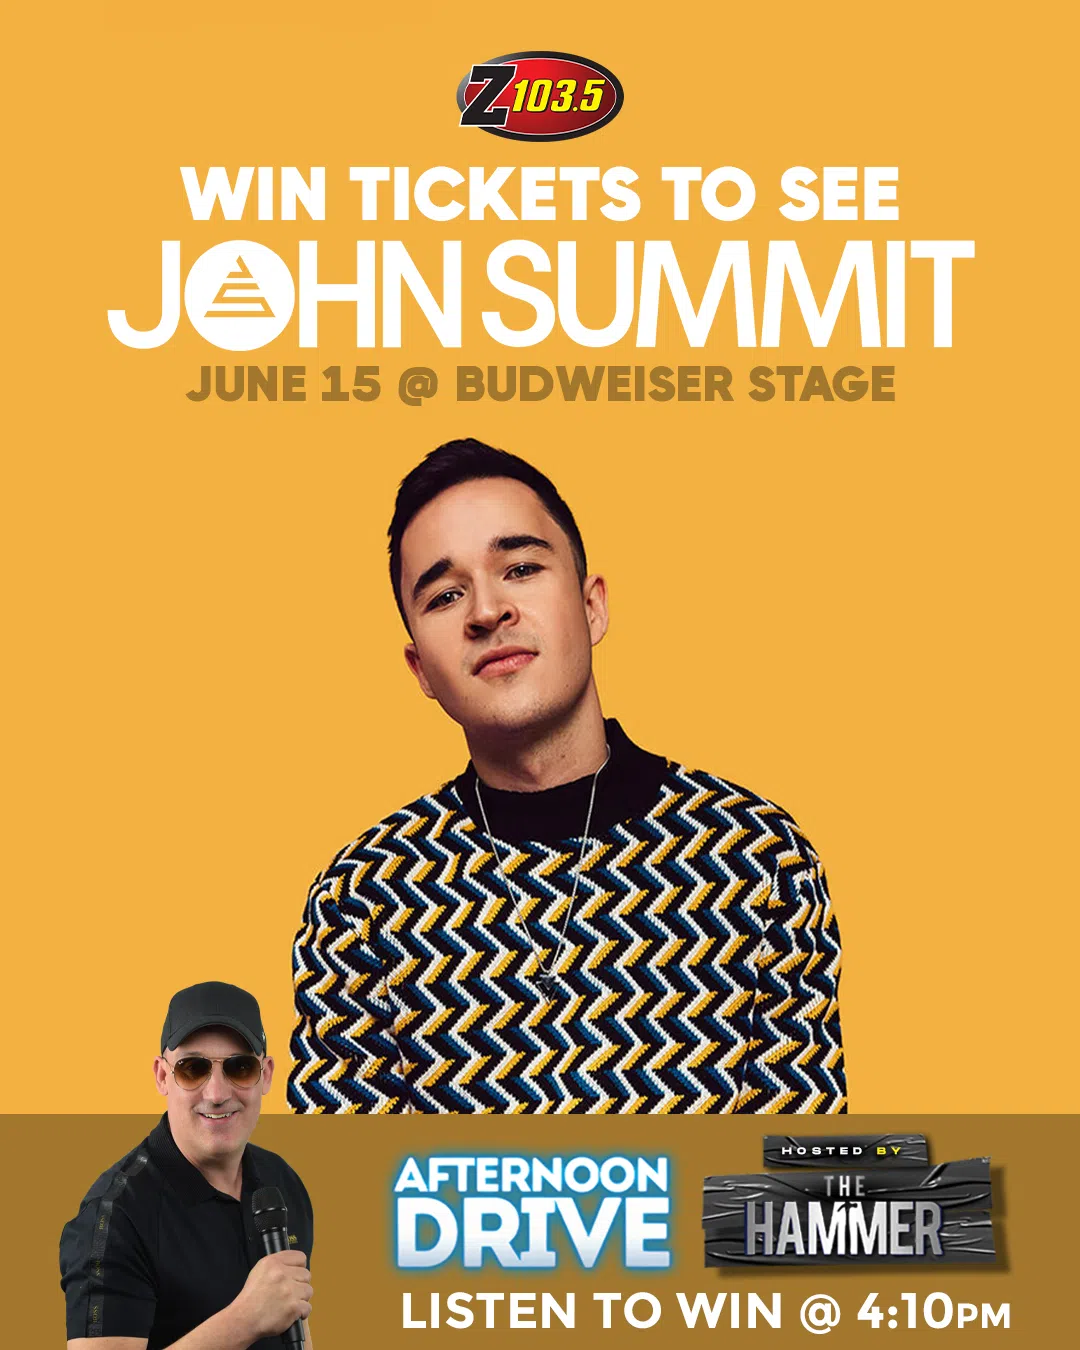 Feature: https://z1035.com/win/win-tickets-to-see-john-summit/